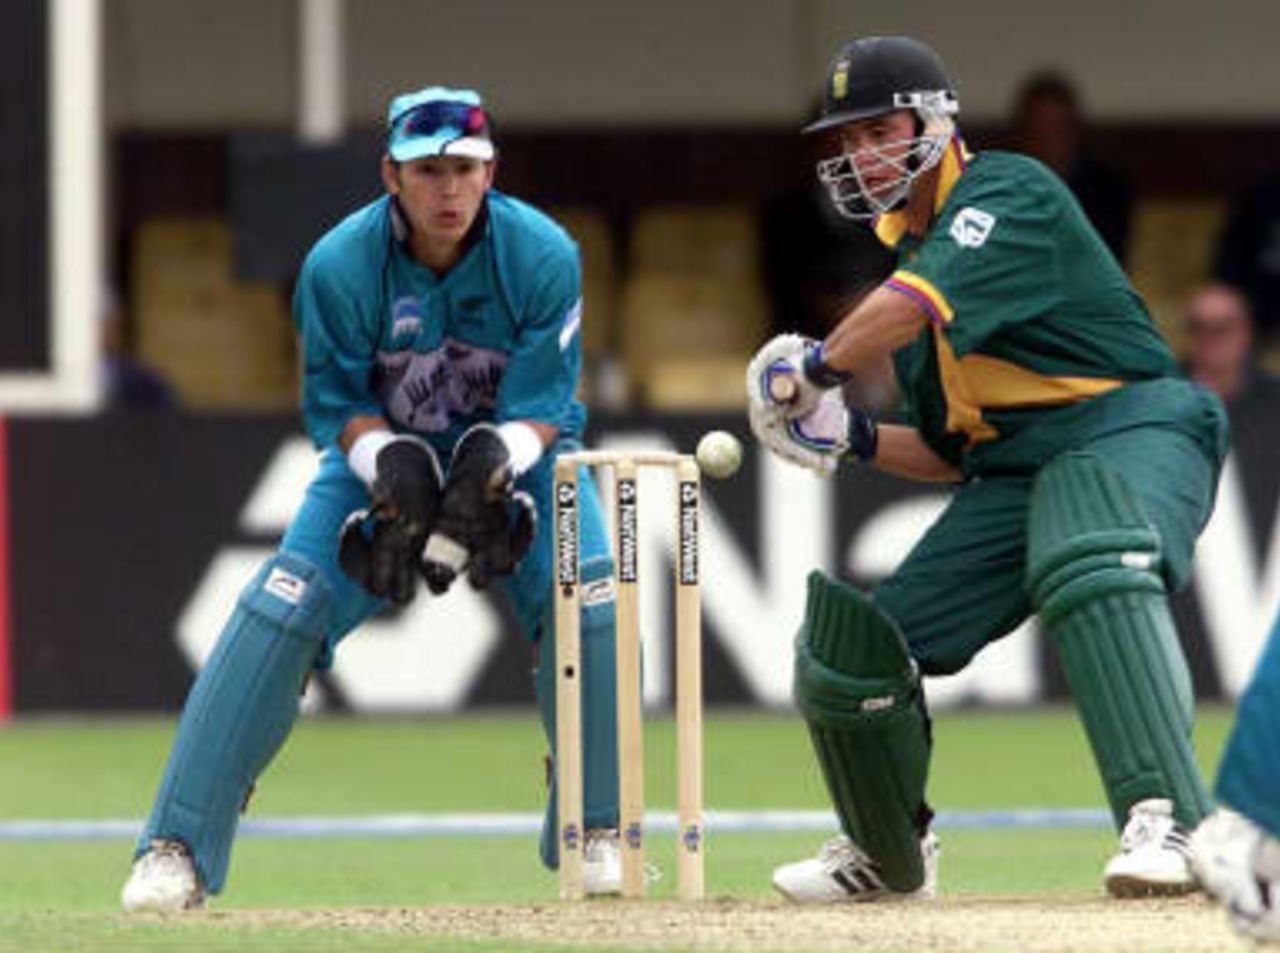 South Africa's Herschelle Gibbs hits a four on his way to making 91 runs off the bowling of New Zealand's Chris Harris 10 June 99, during their Super Six match in the Cricket World Cup at Edgbaston, Birmingham. The final will be at Lords on the 20 June 99